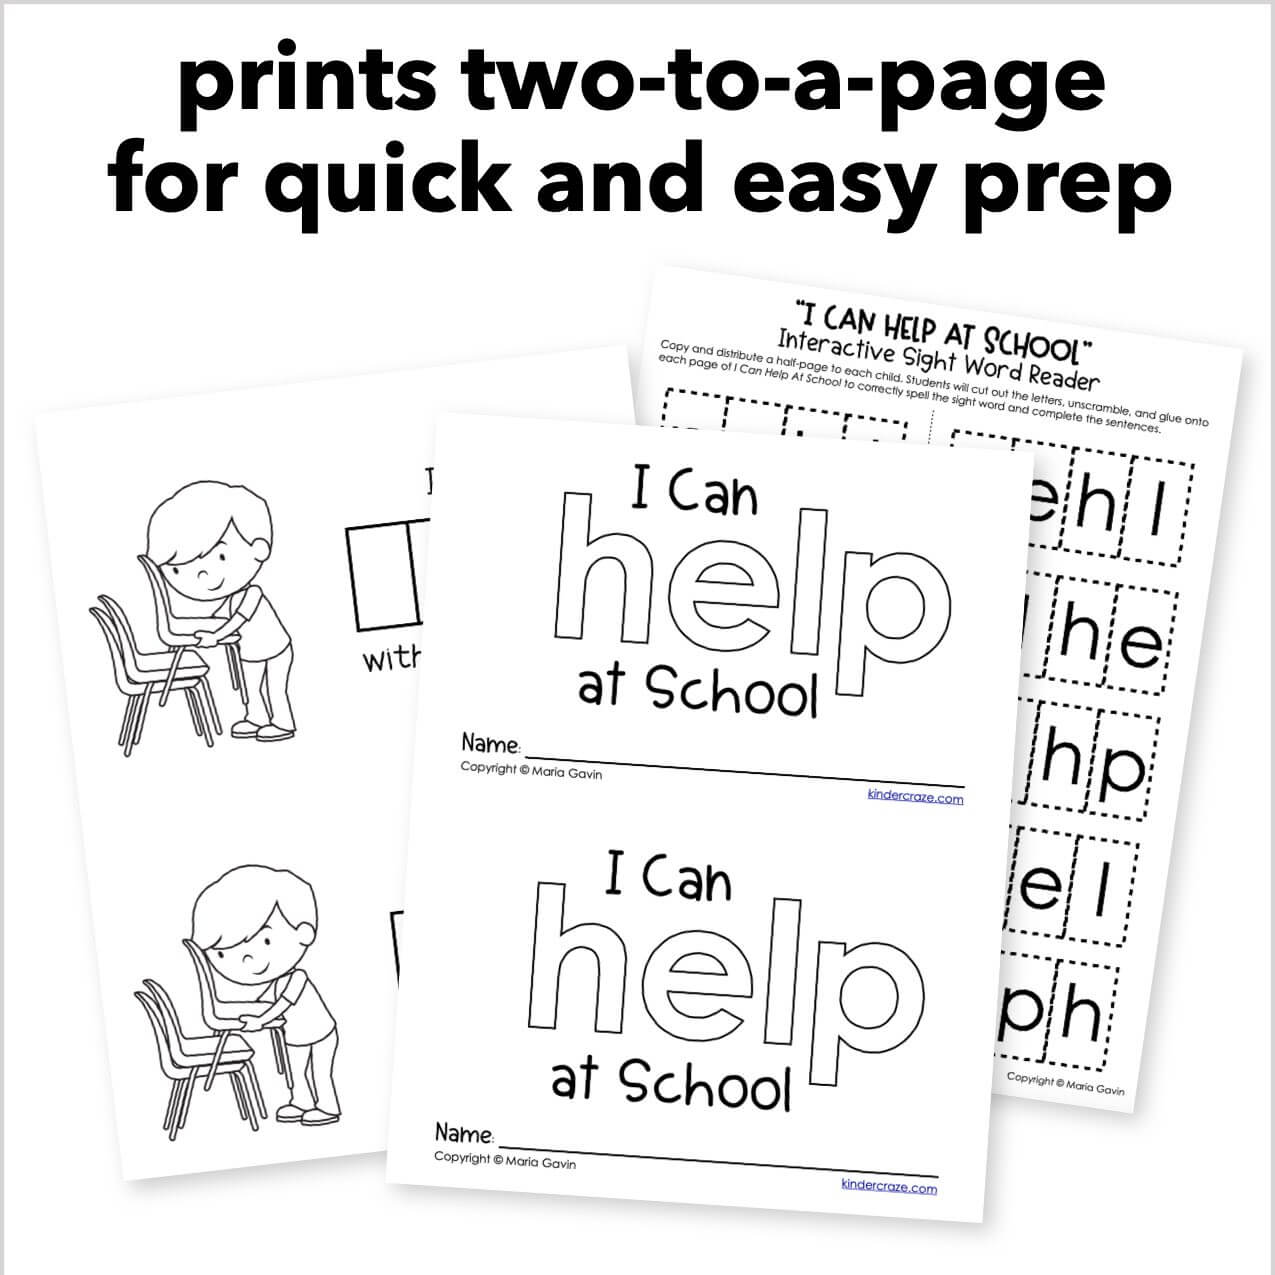 I can help at school interactive sight word reader